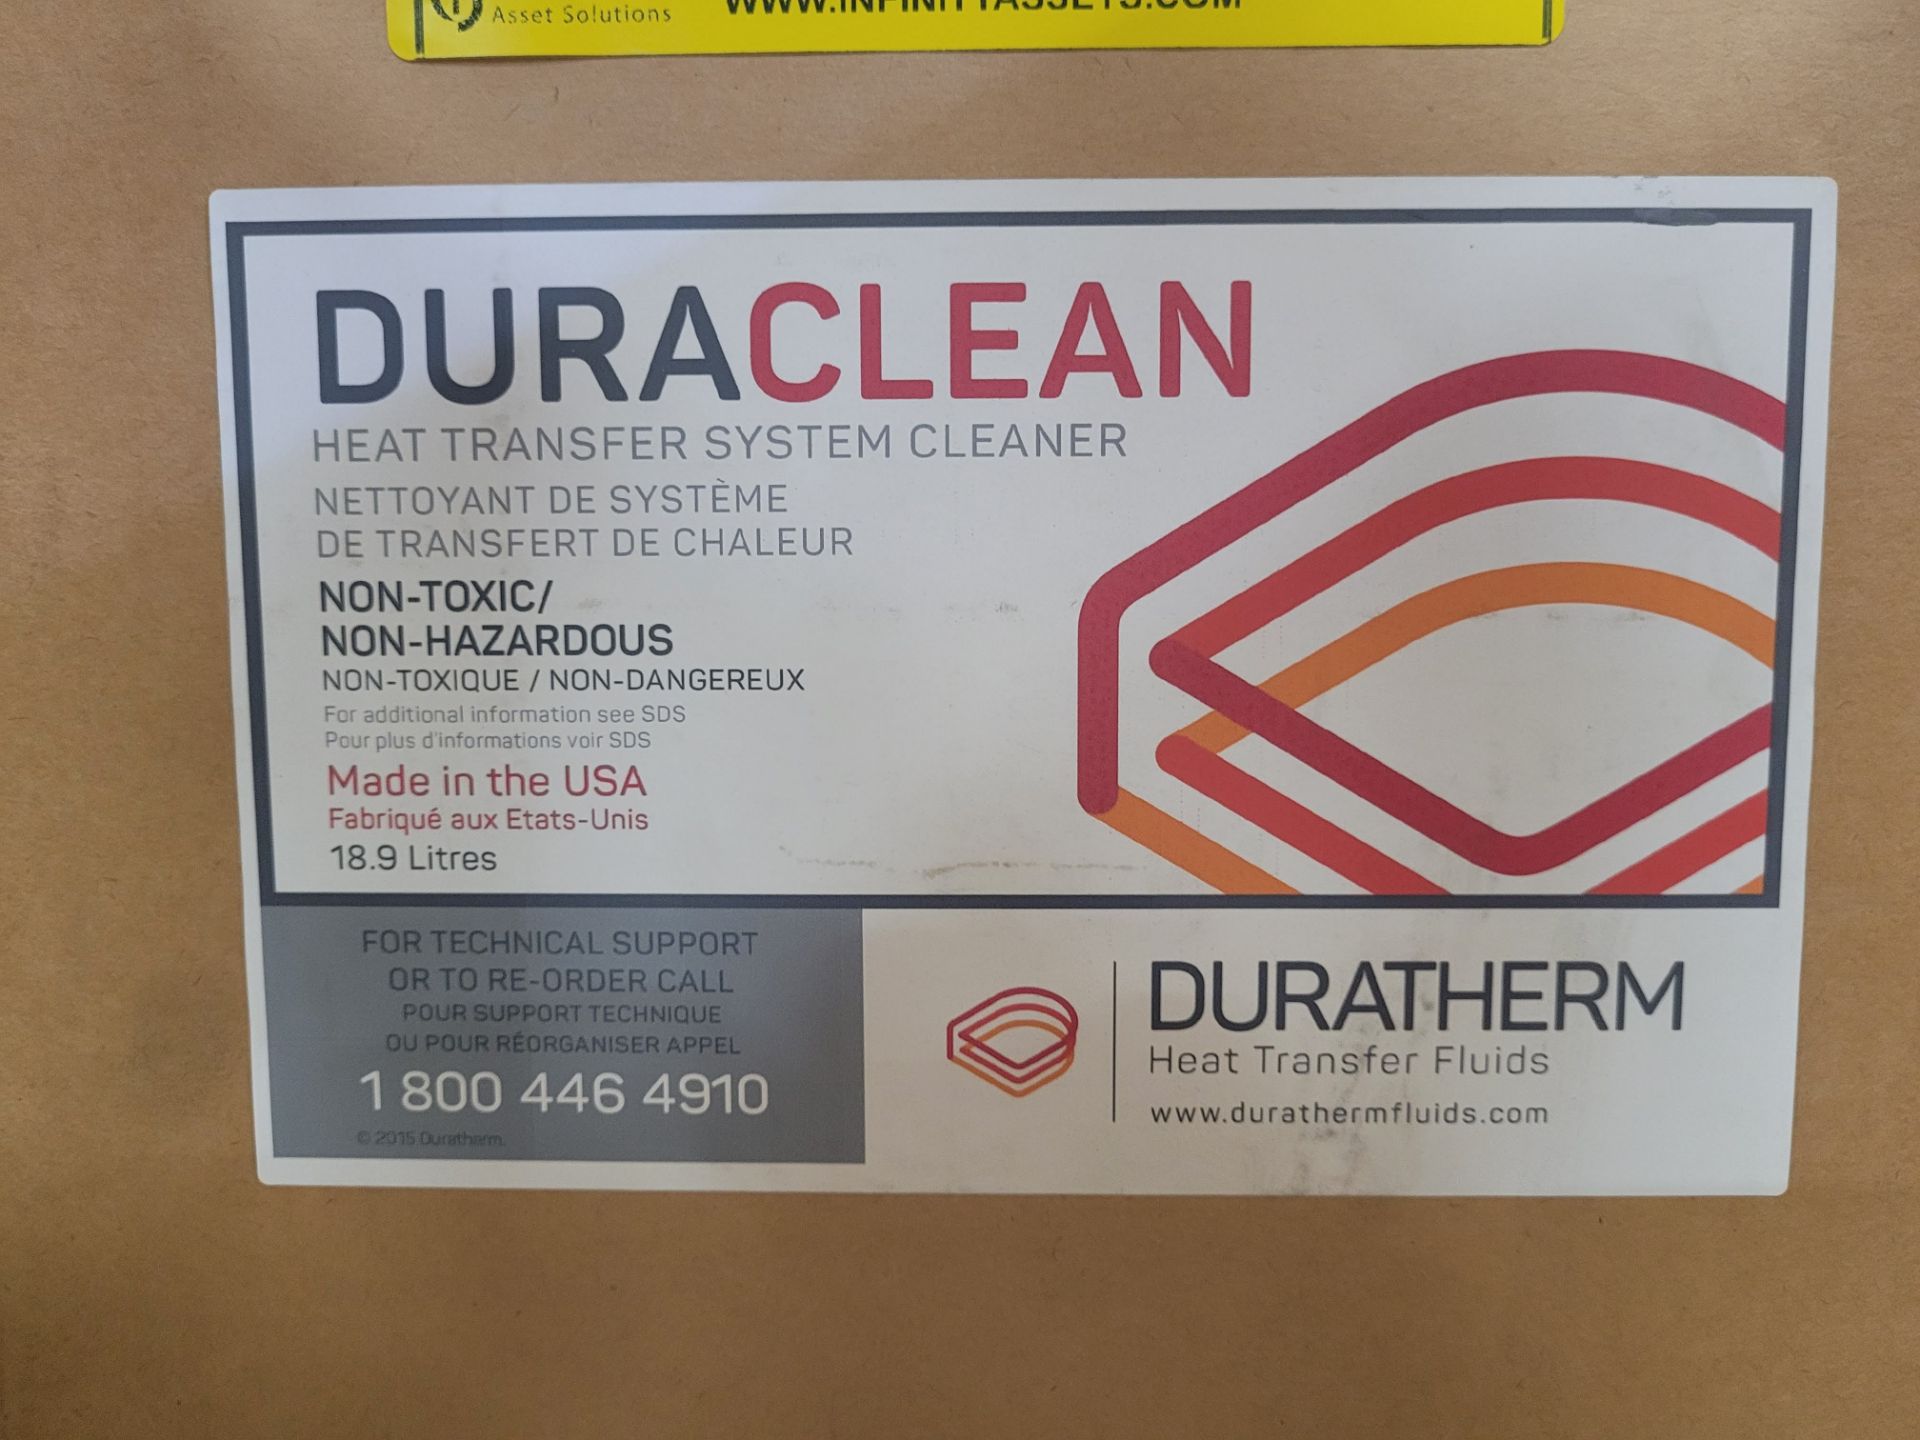 LOT - DURACLEAN HEAT TRANSFER SYSTEM CLEANER - Image 2 of 2